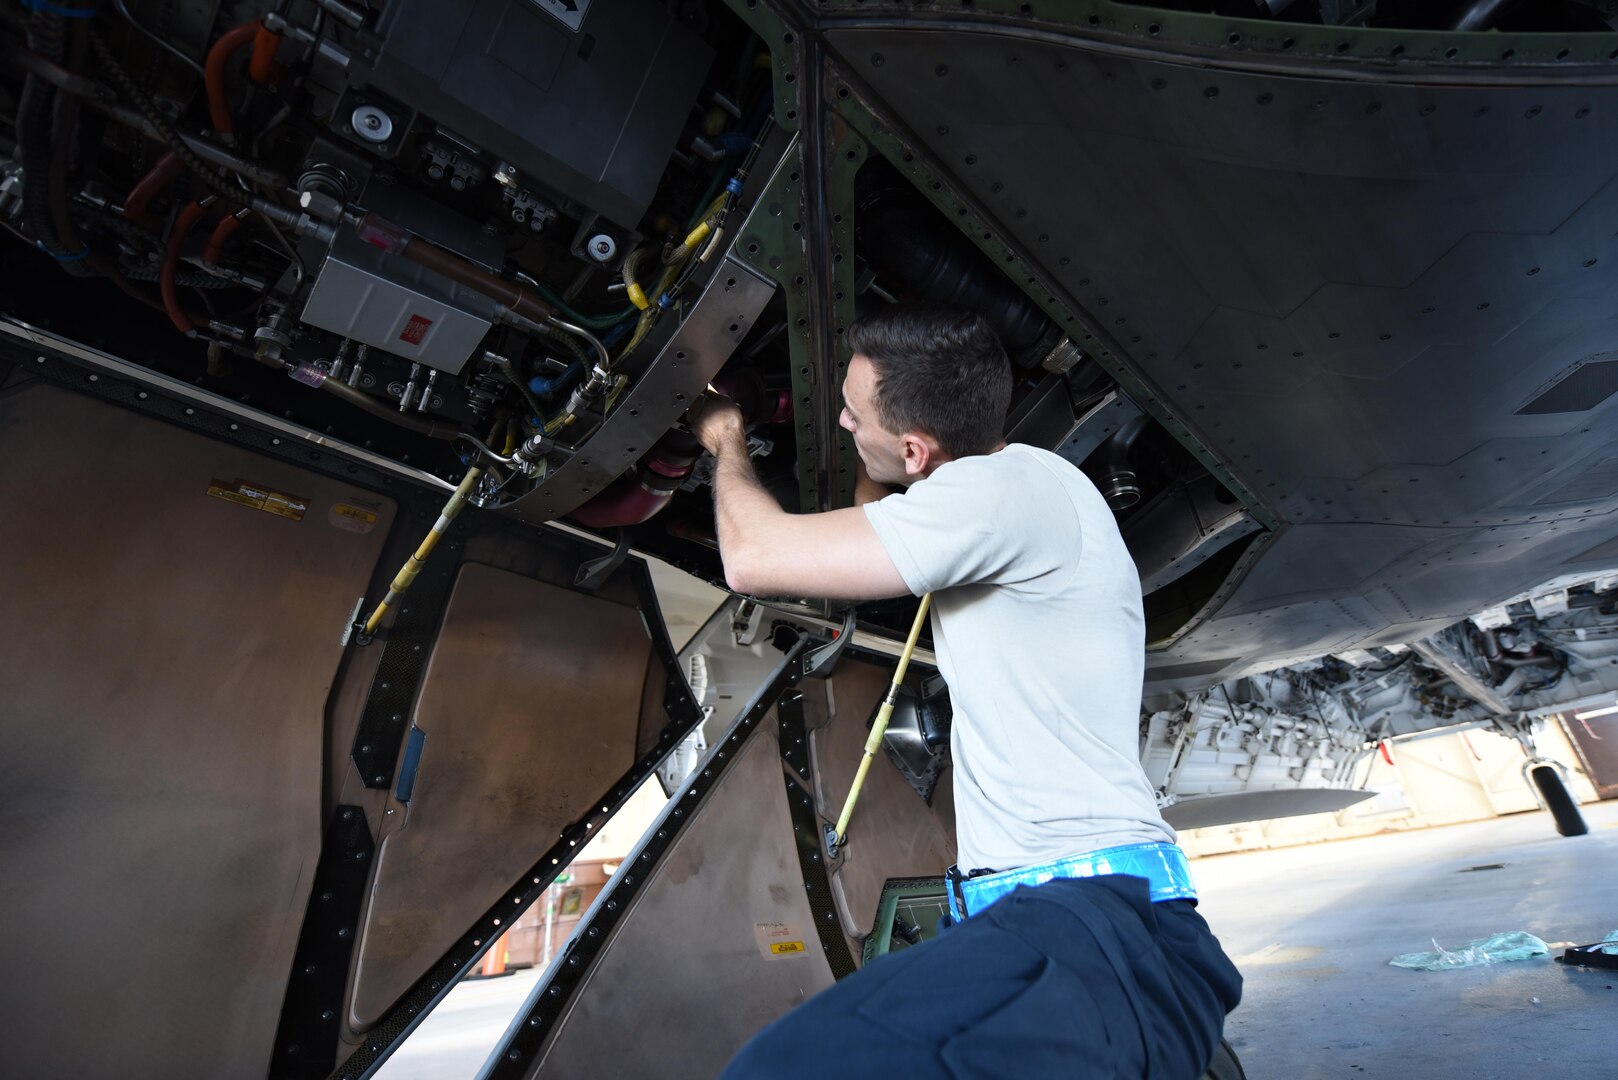 U.S. Air Force Tech. Sgt. Robert Mackle, 325th Aircraft Maintenance Squadron dedicated crew chief, inspects the underbelly of an F-22 Raptor in Hangar 2 at Tyndall Air Force Base, Fla., March 20, 2017. Prior to a sortie, dedicated crew chiefs like Mackle inspect and maintain the aircraft to ensure the F-22’s operational readiness. (U.S. Air Force photo by Senior Airman Solomon Cook/Released)